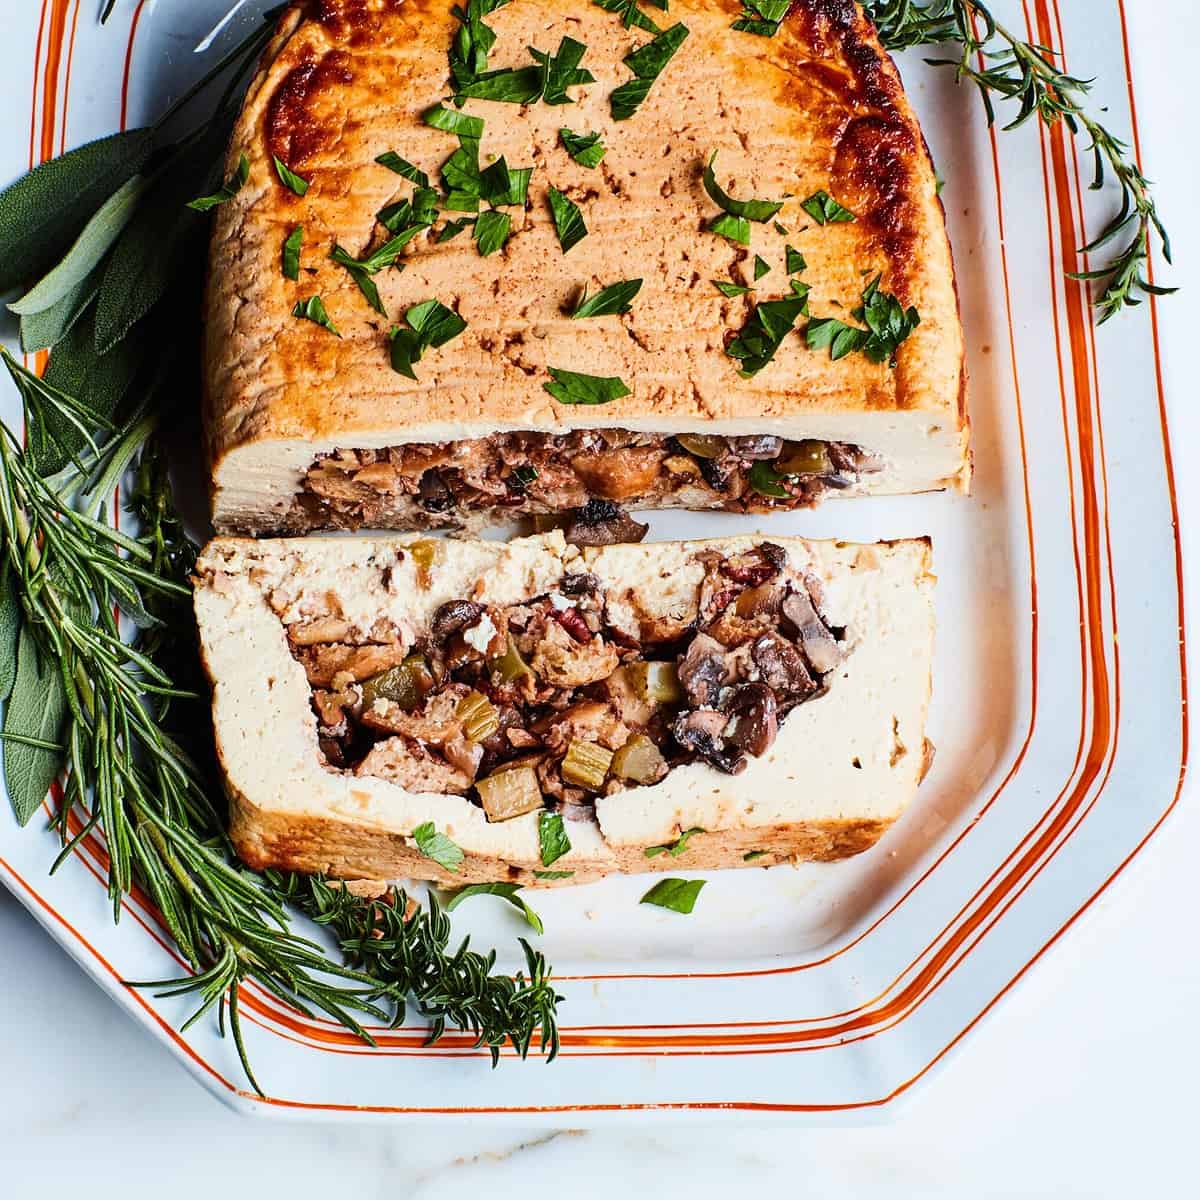  Who says you can't have a cruelty-free holiday feast? This tofu roast is proof that veganism is delicious.